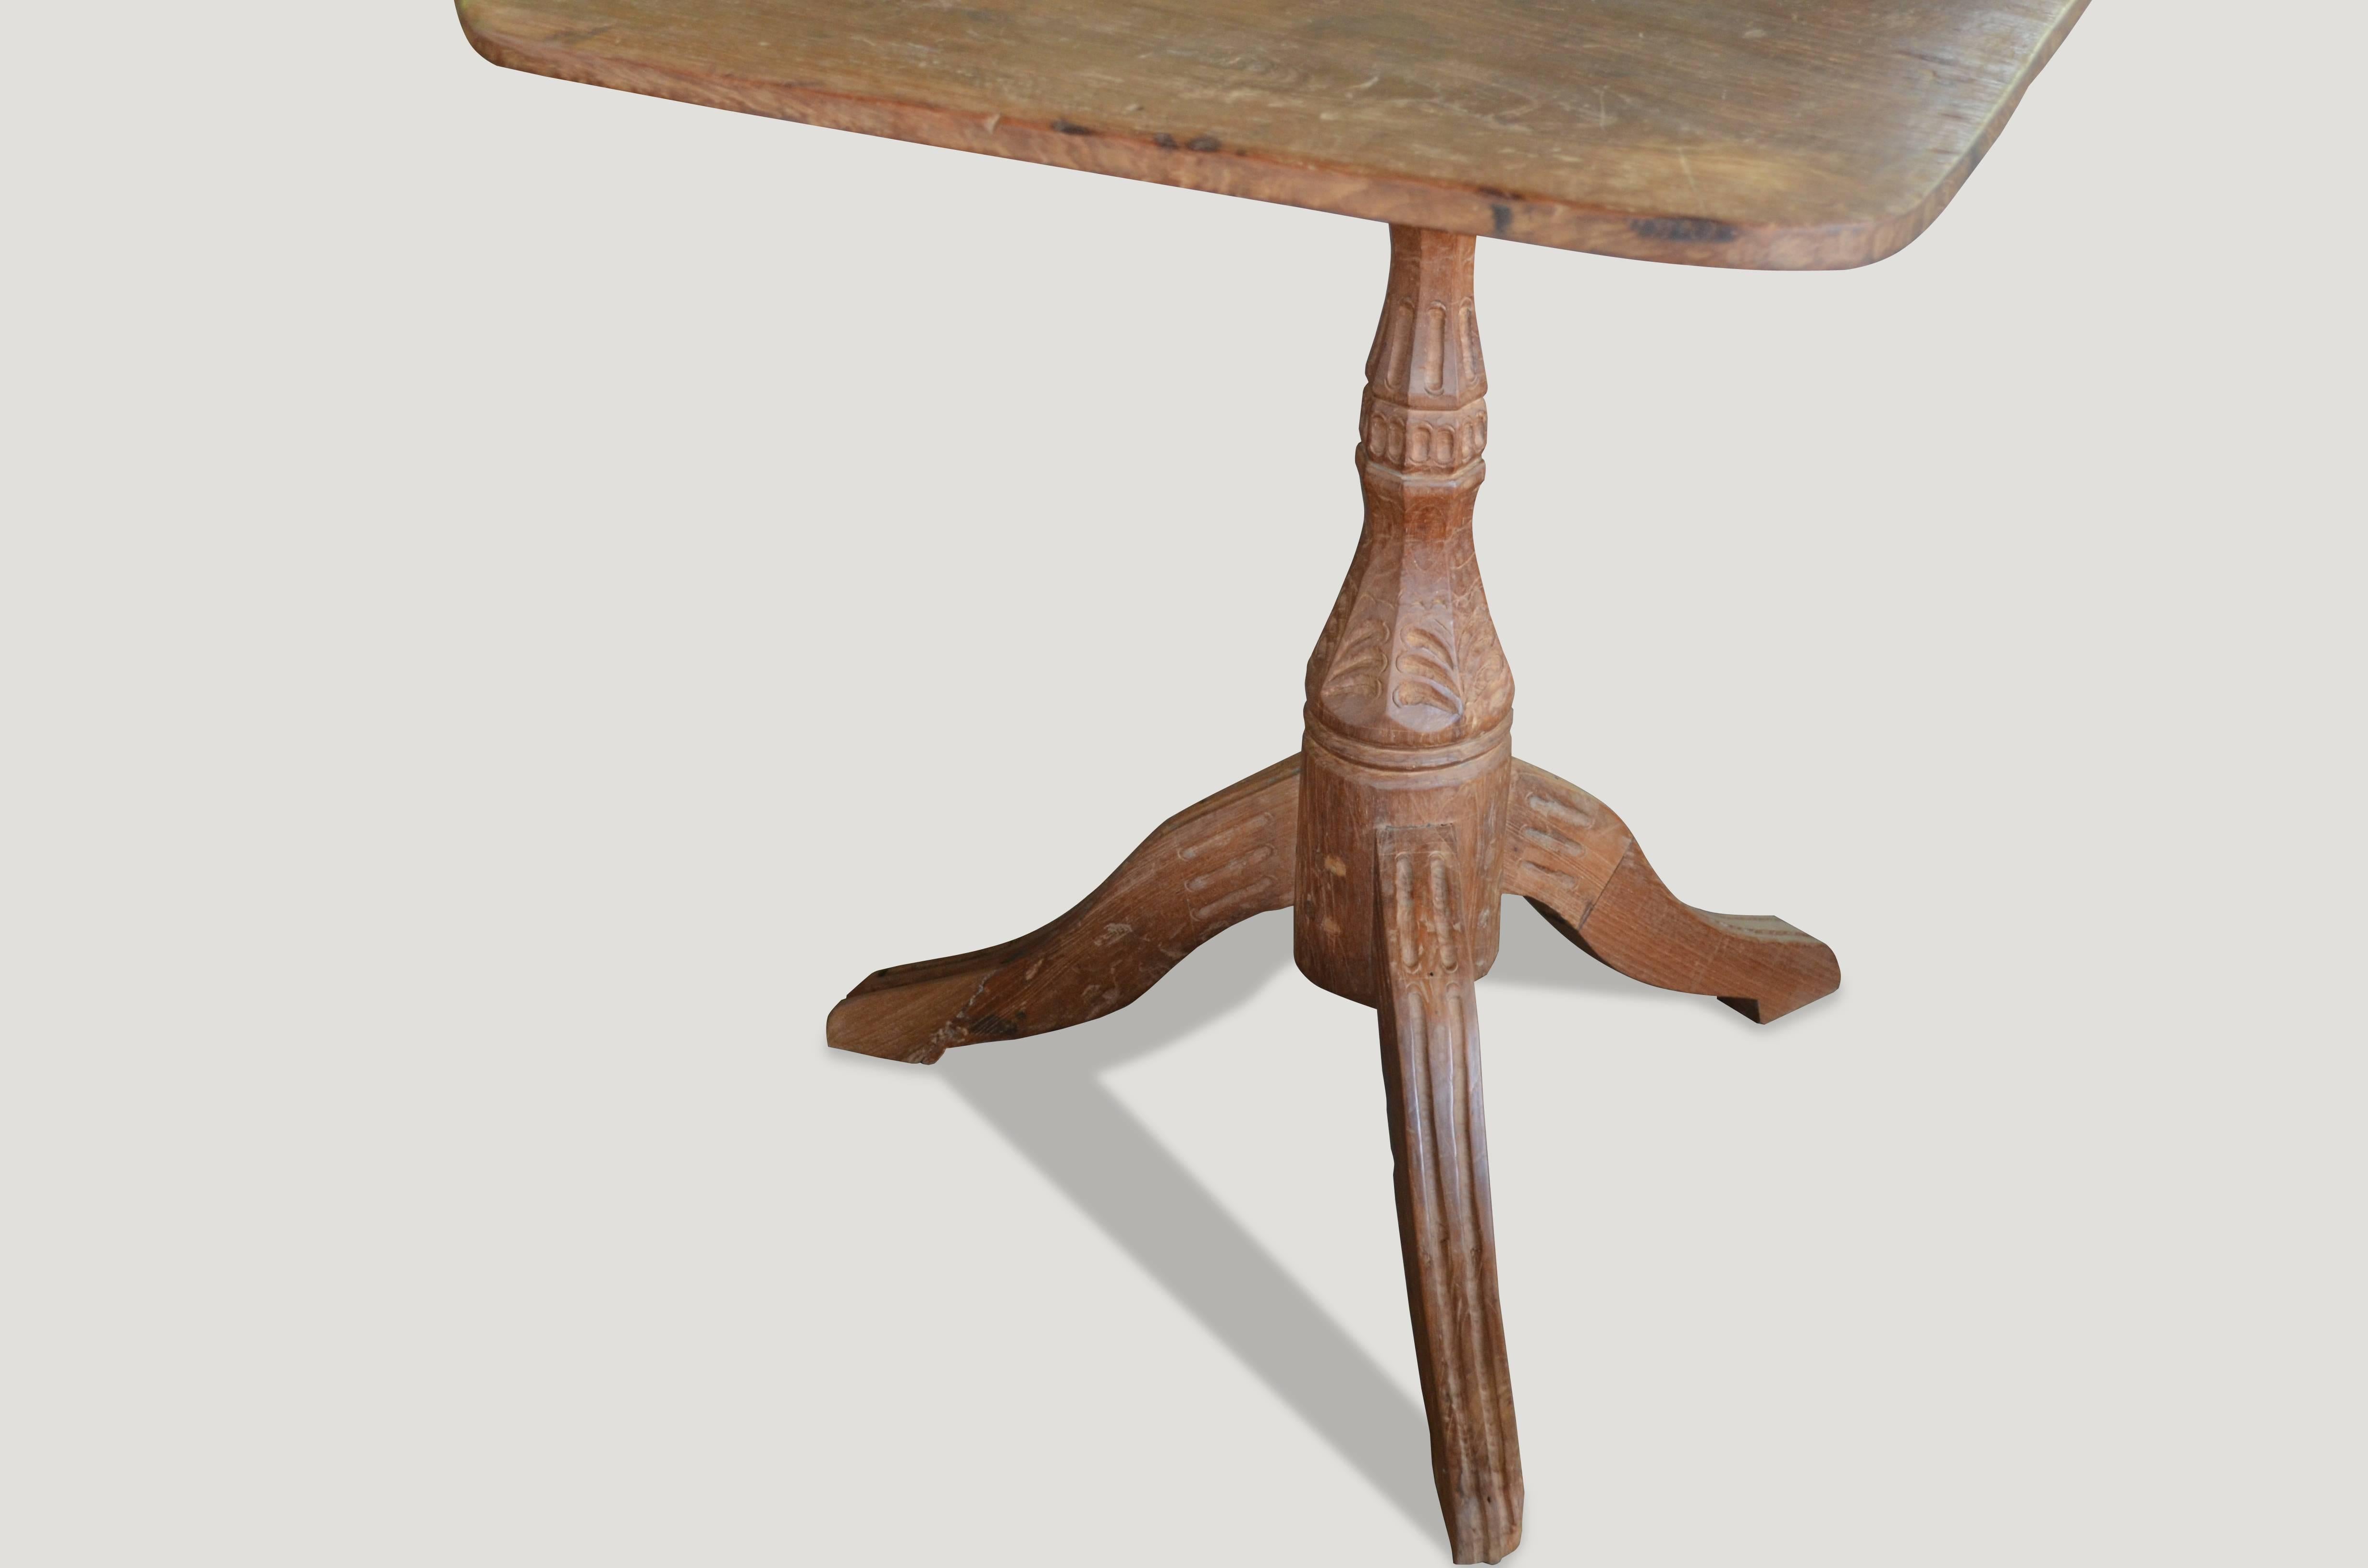 Andrianna Shamaris teak colonial hand-carved side table.

This side table was sourced in the spirit of wabi-sabi, a Japanese philosophy that beauty can be found in imperfection and impermanence. It’s a beauty of things modest and humble. It’s a